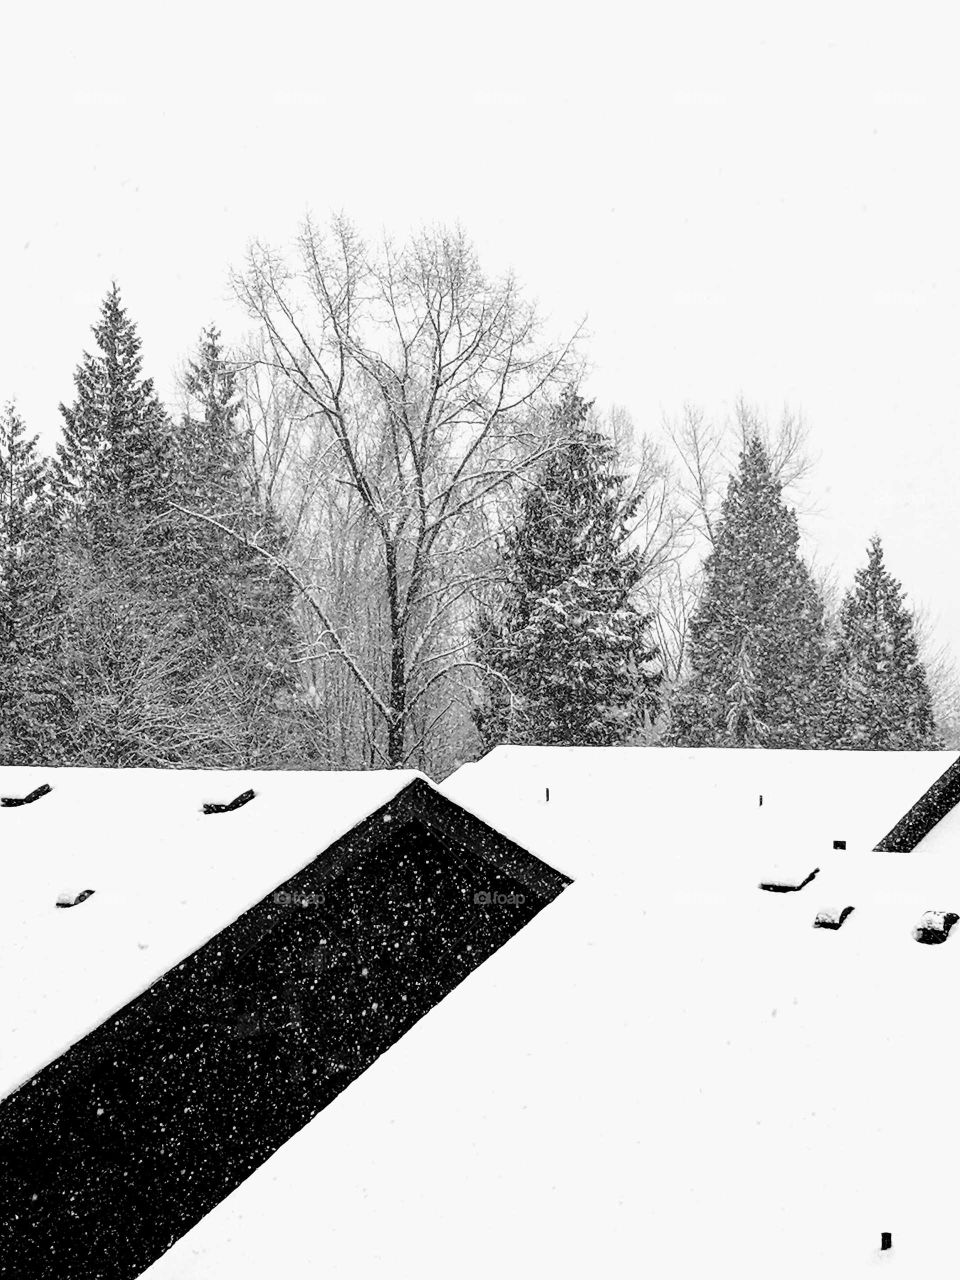 Black and white winter scene. Snow on roof tops. Snowing black and white  photo. Snow on trees